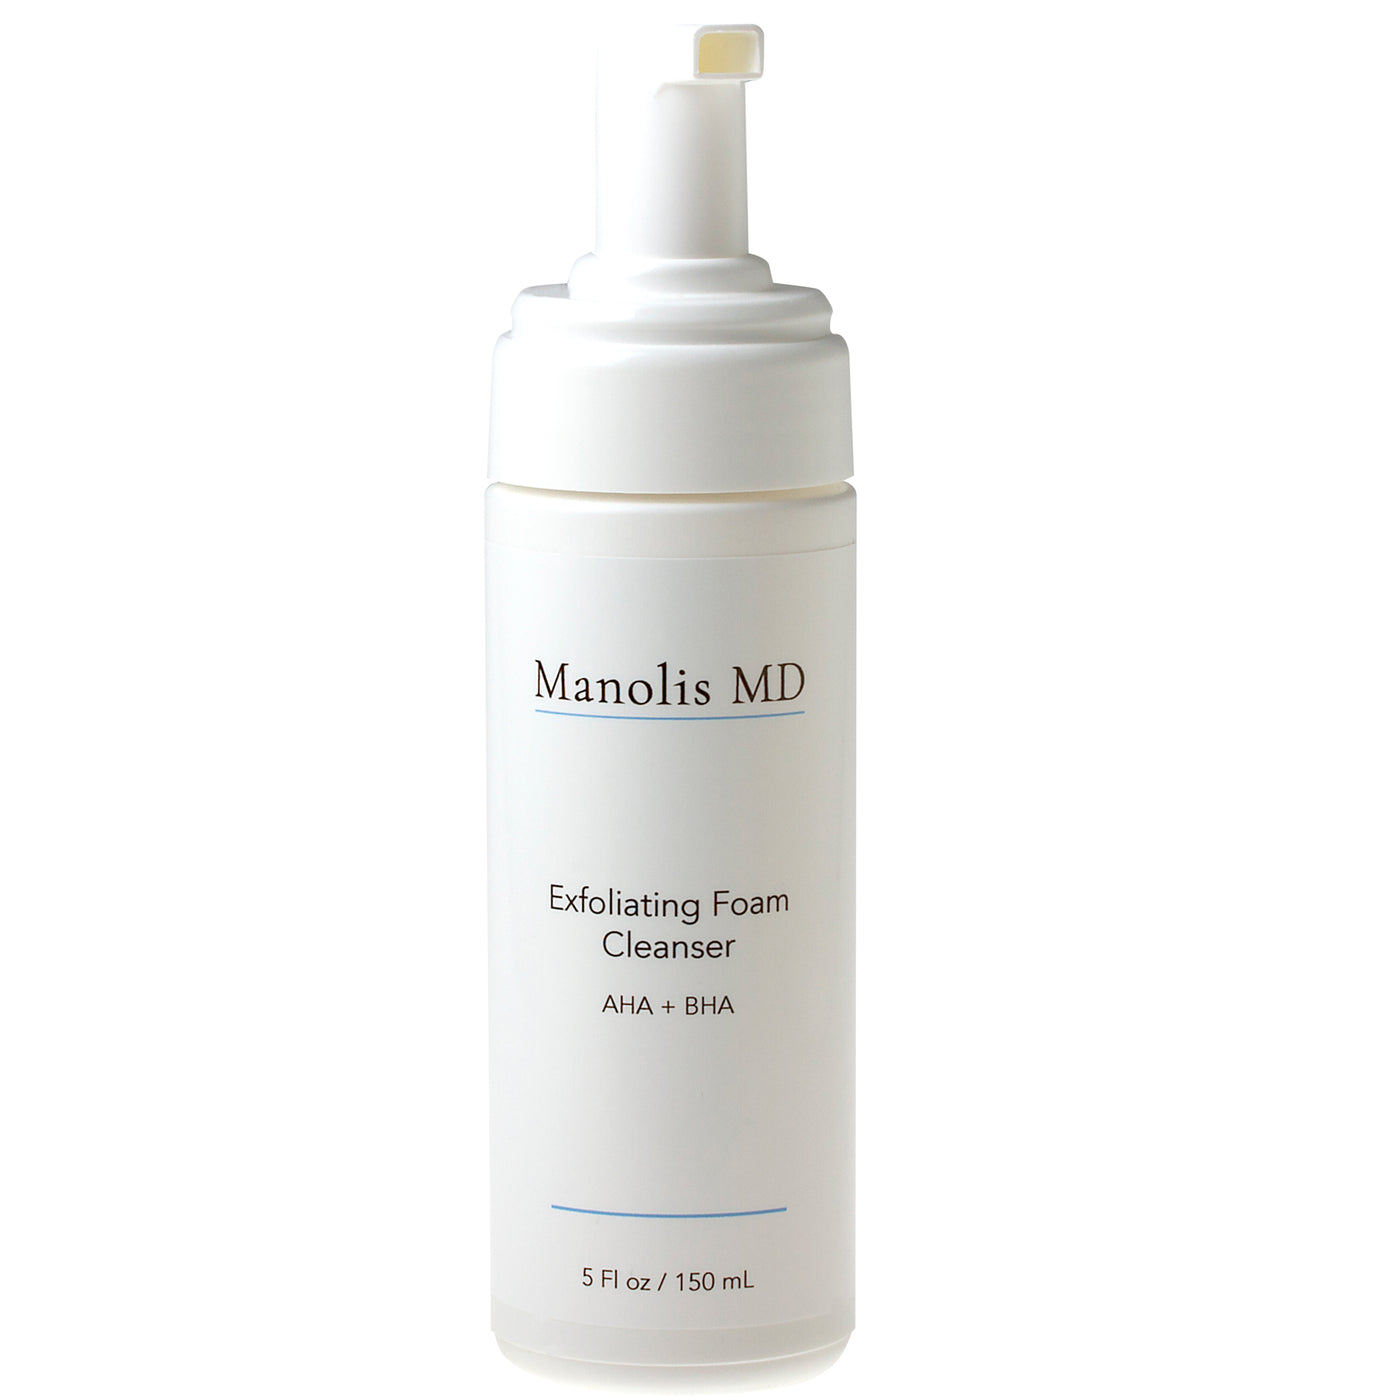 The Exfoliating Foam Cleanser removes surface dirt and oil without stripping the skin. This cleanser contains purifying alpha and beta hydroxyacids, suitable for clients with combination to oily skin.